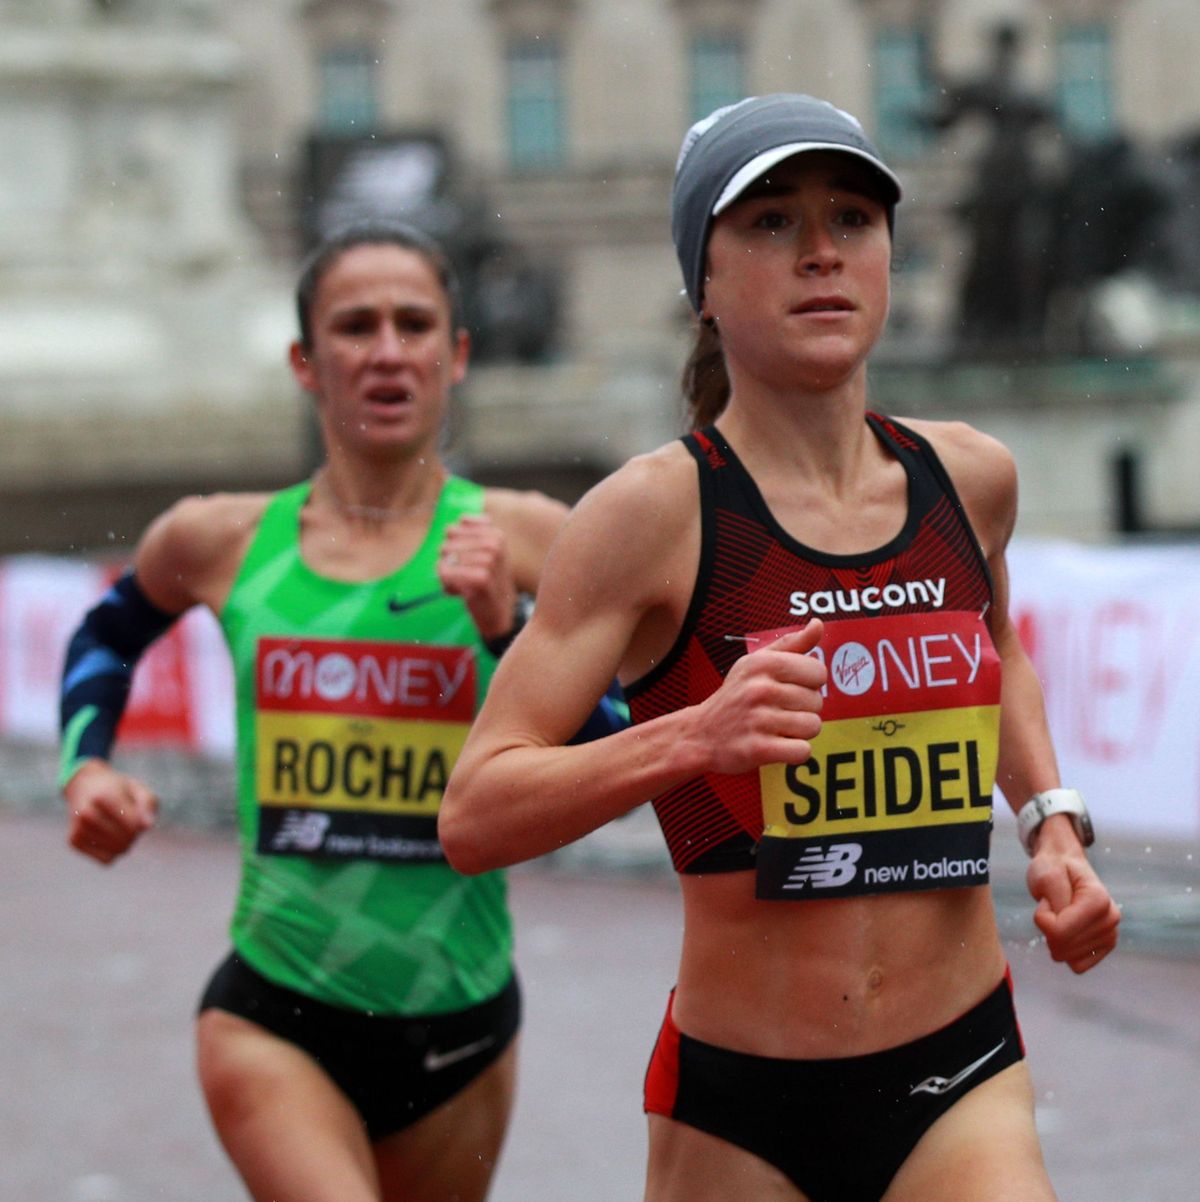 us runner molly seidel r leads portugals carla salome rocha during the womens race of the 2020 london marathon in central london on october 4, 2020   this years london marathon, an elite athlete only event, takes place in a secure biosphere on a enclosed, looped course, in st jamess park, due to coronavirus restrictions photo by ian walton  pool  afp  restricted to editorial use   sponsorship of content subject to lmel agreement photo by ian waltonpoolafp via getty images